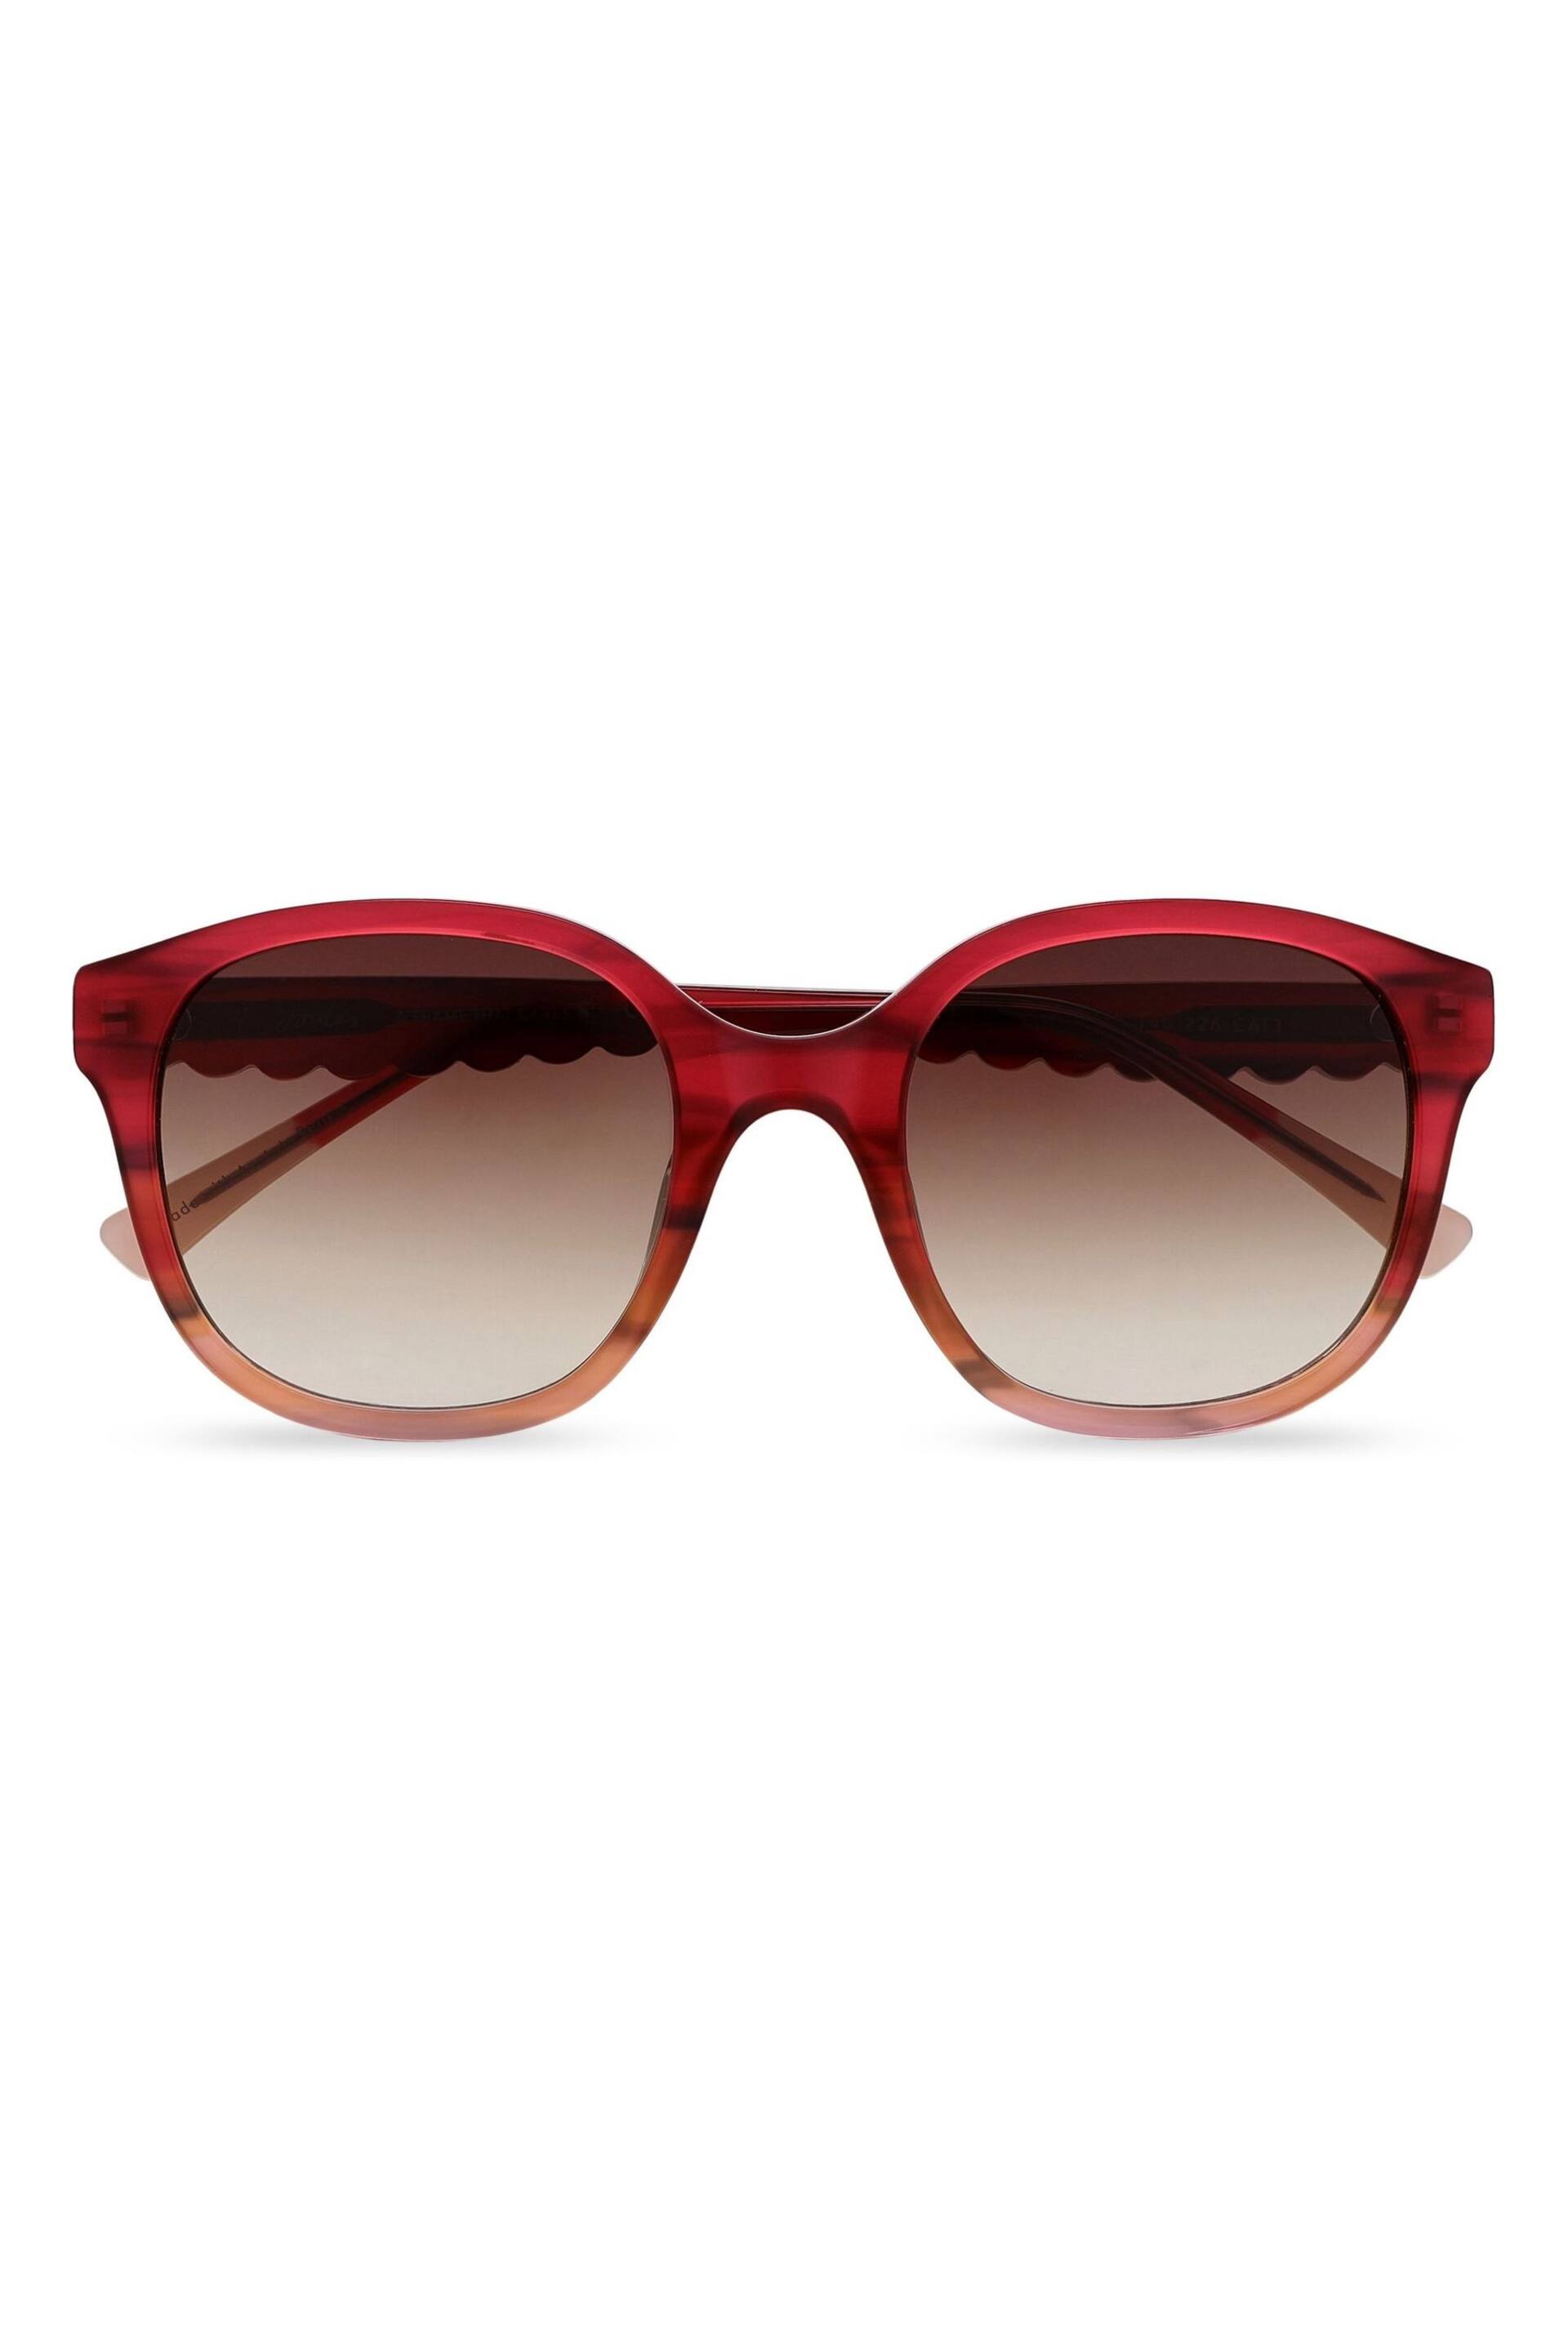 Joules Pink Joules Pink Foxglove Sunglasses - Image 1 of 4